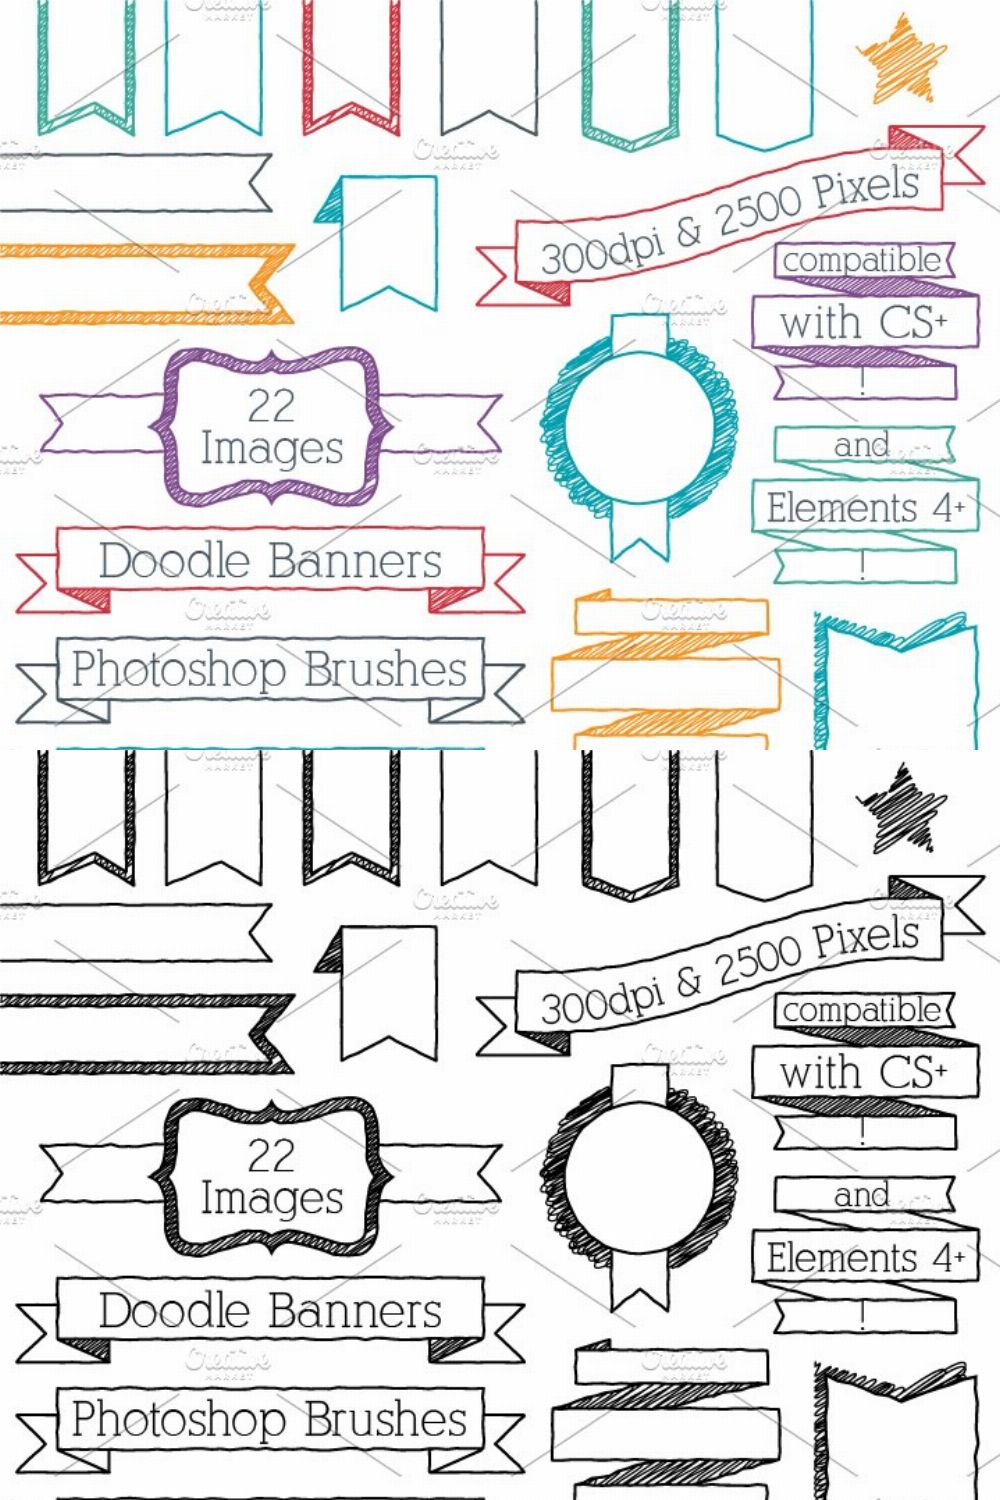 Doodle Banners Photoshop Brushes pinterest preview image.